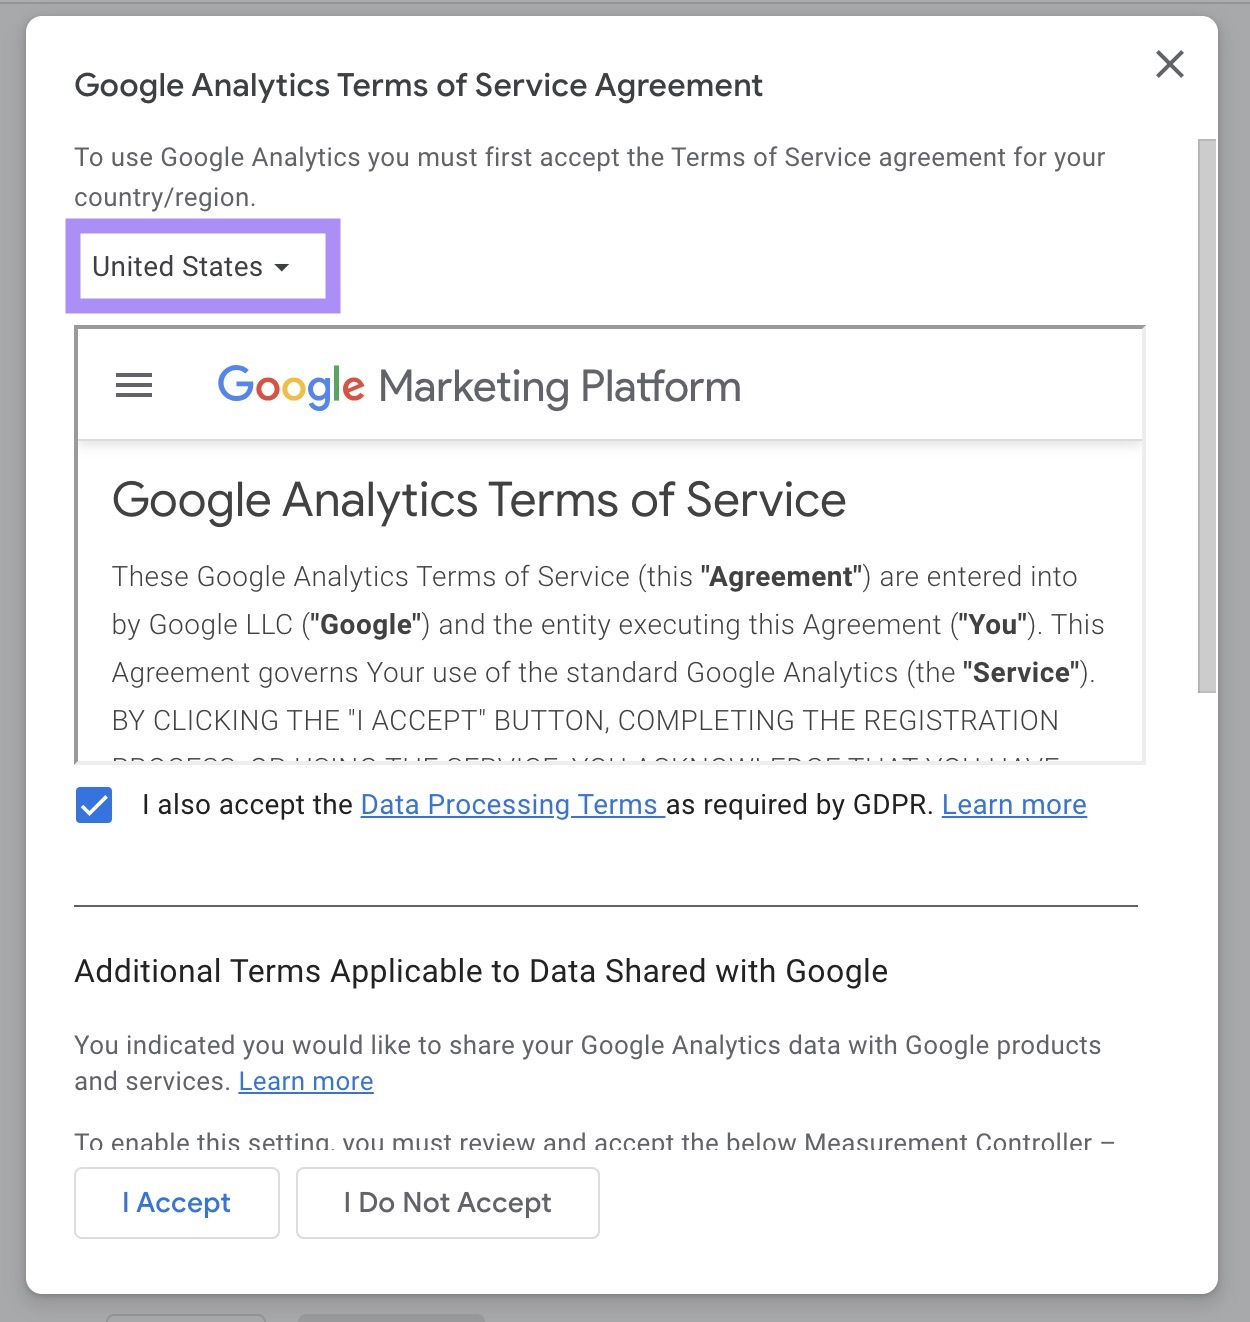 Google Analytics terms of service agreement screen